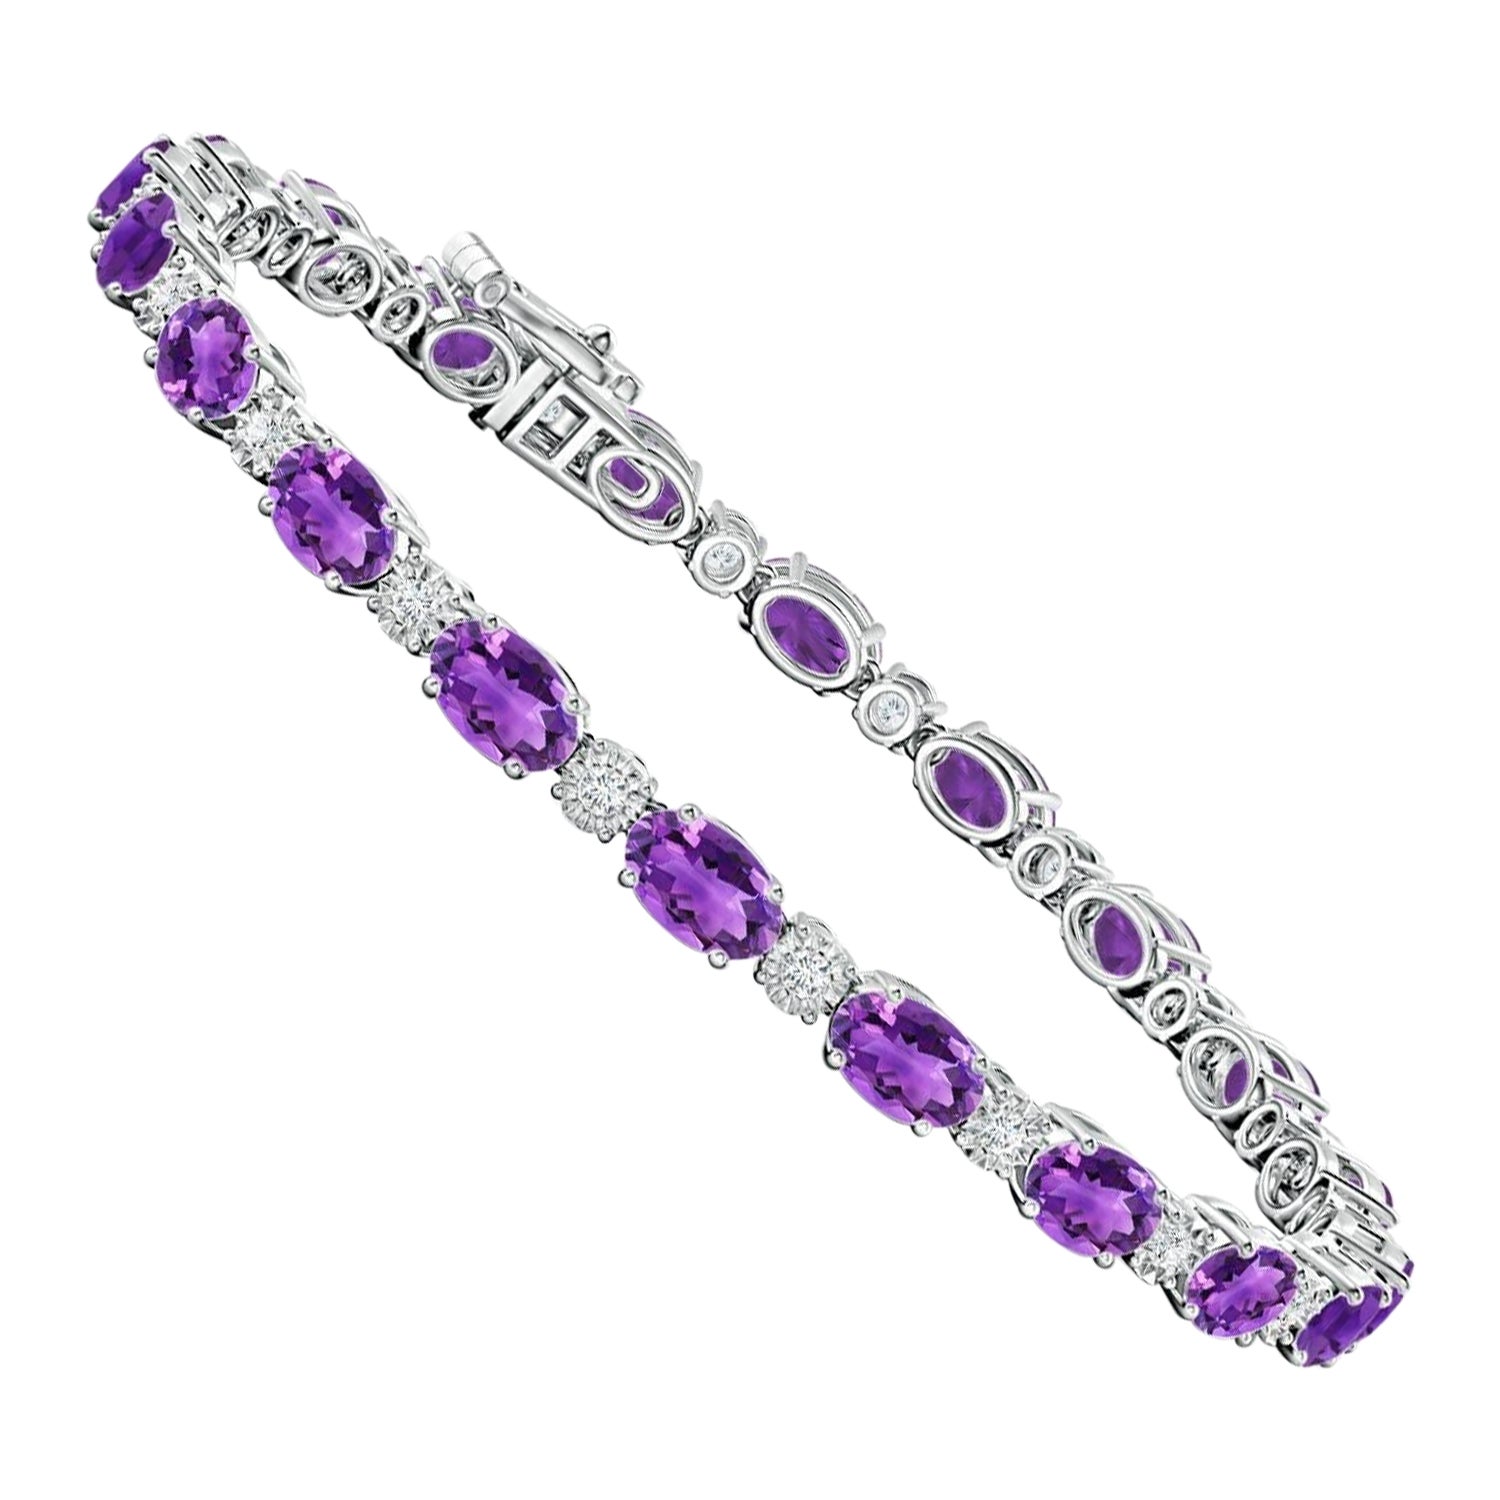 Natural Oval 8ct Amethyst Tennis Bracelet with Diamonds in 14K White Gold